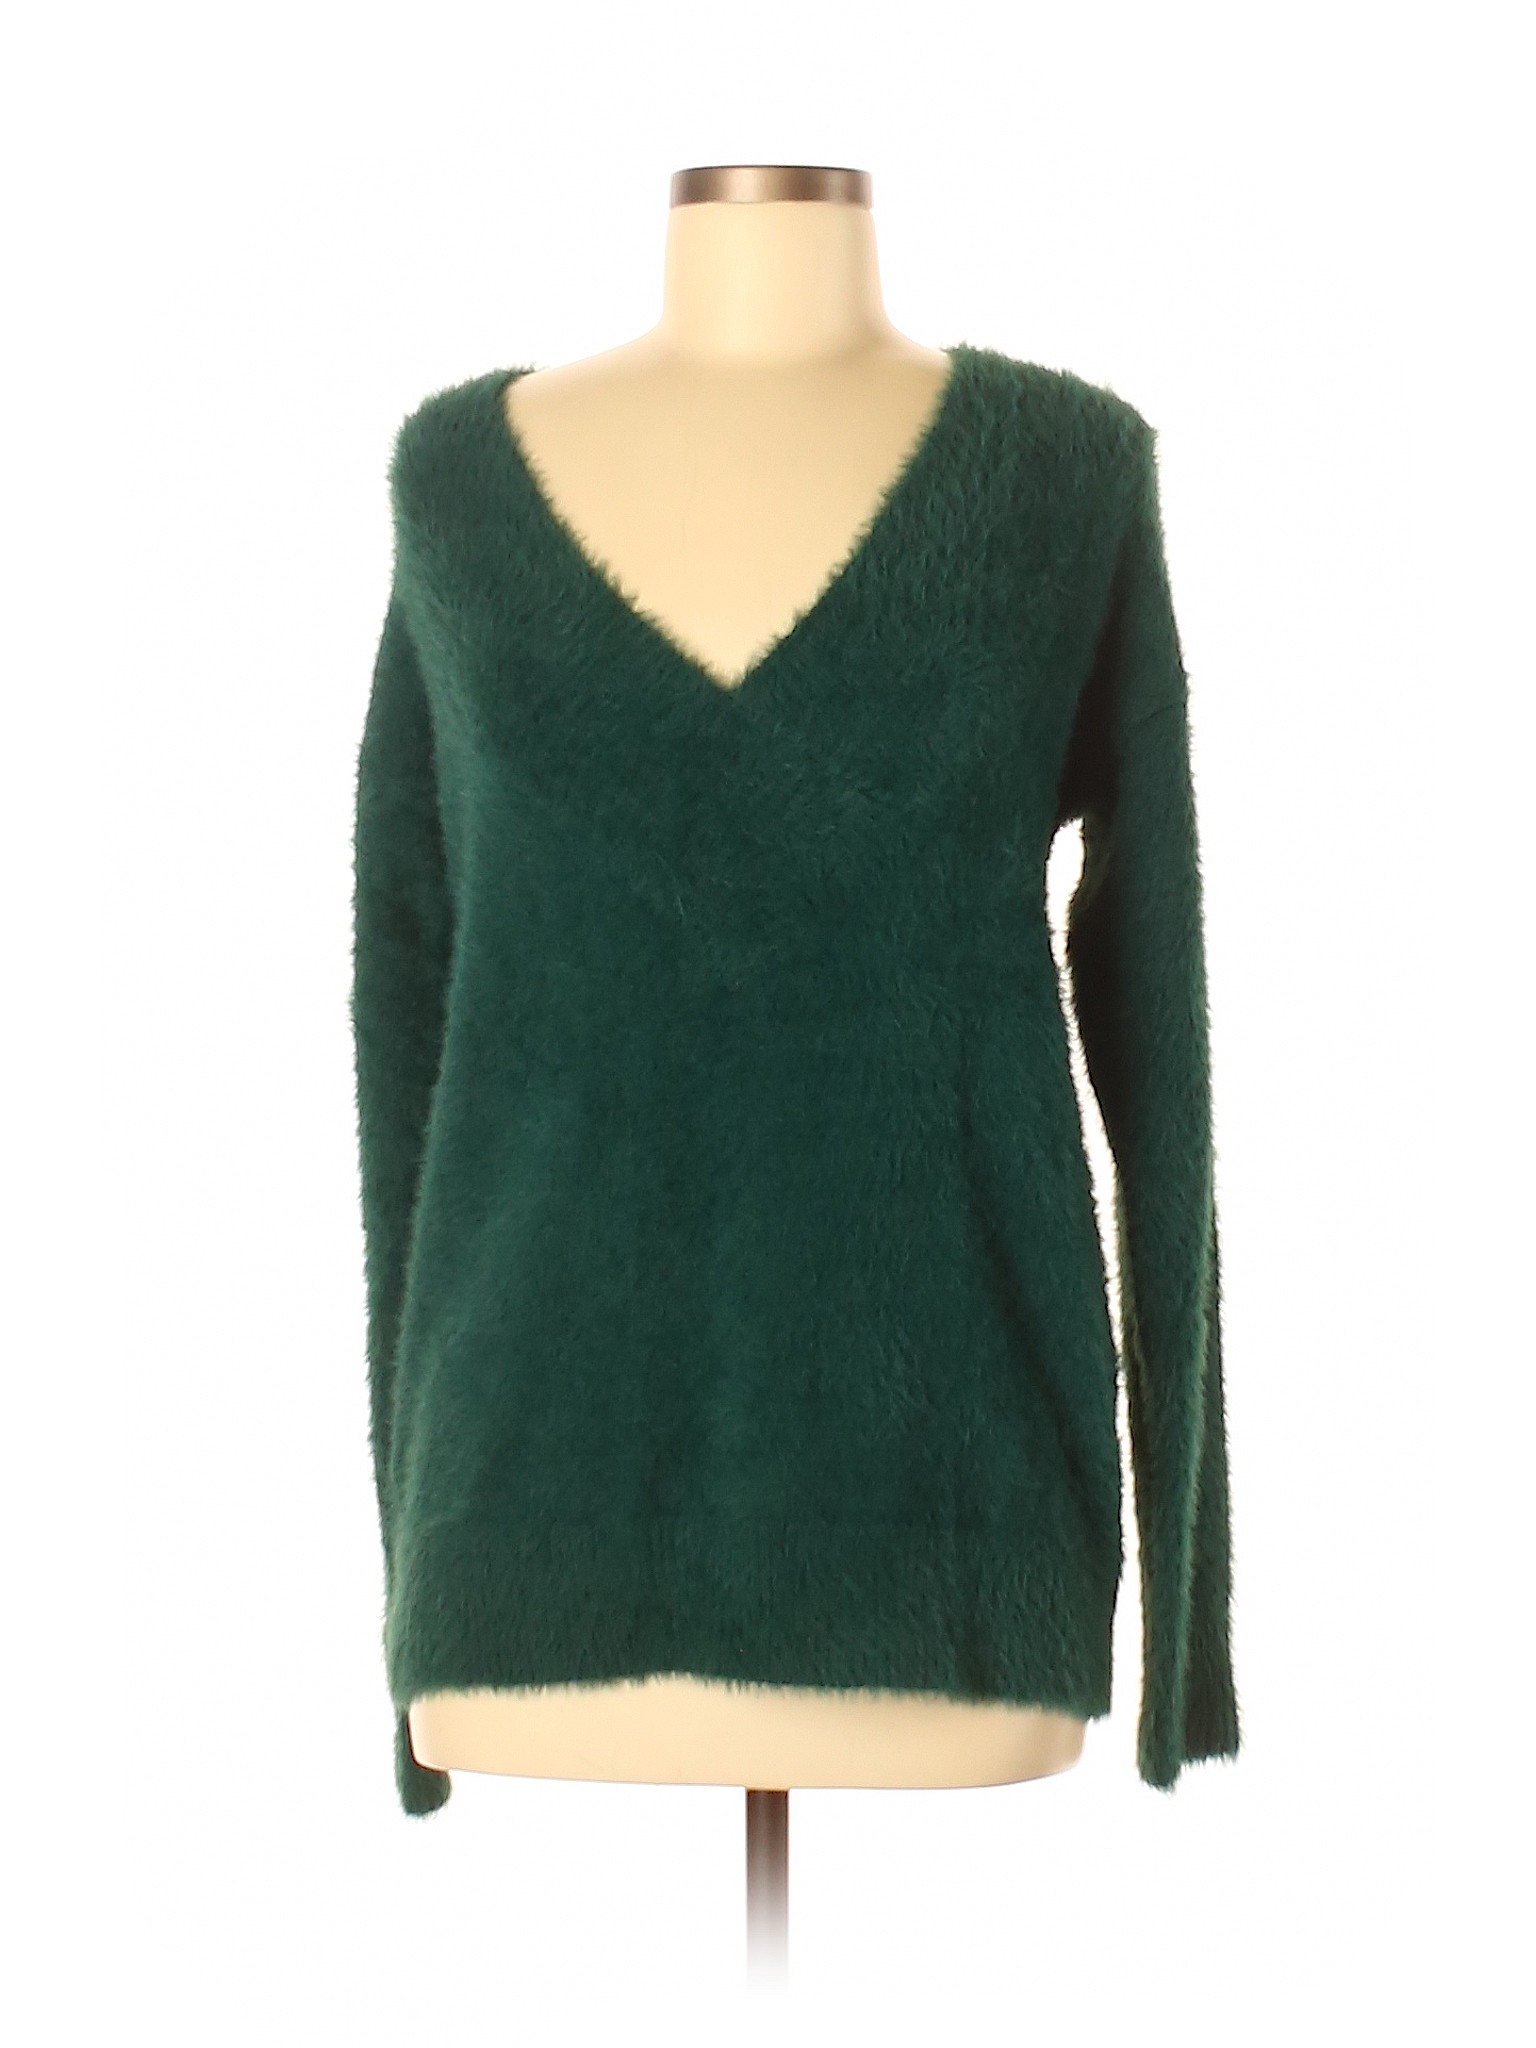 A New Day Women Green Pullover Sweater L | eBay